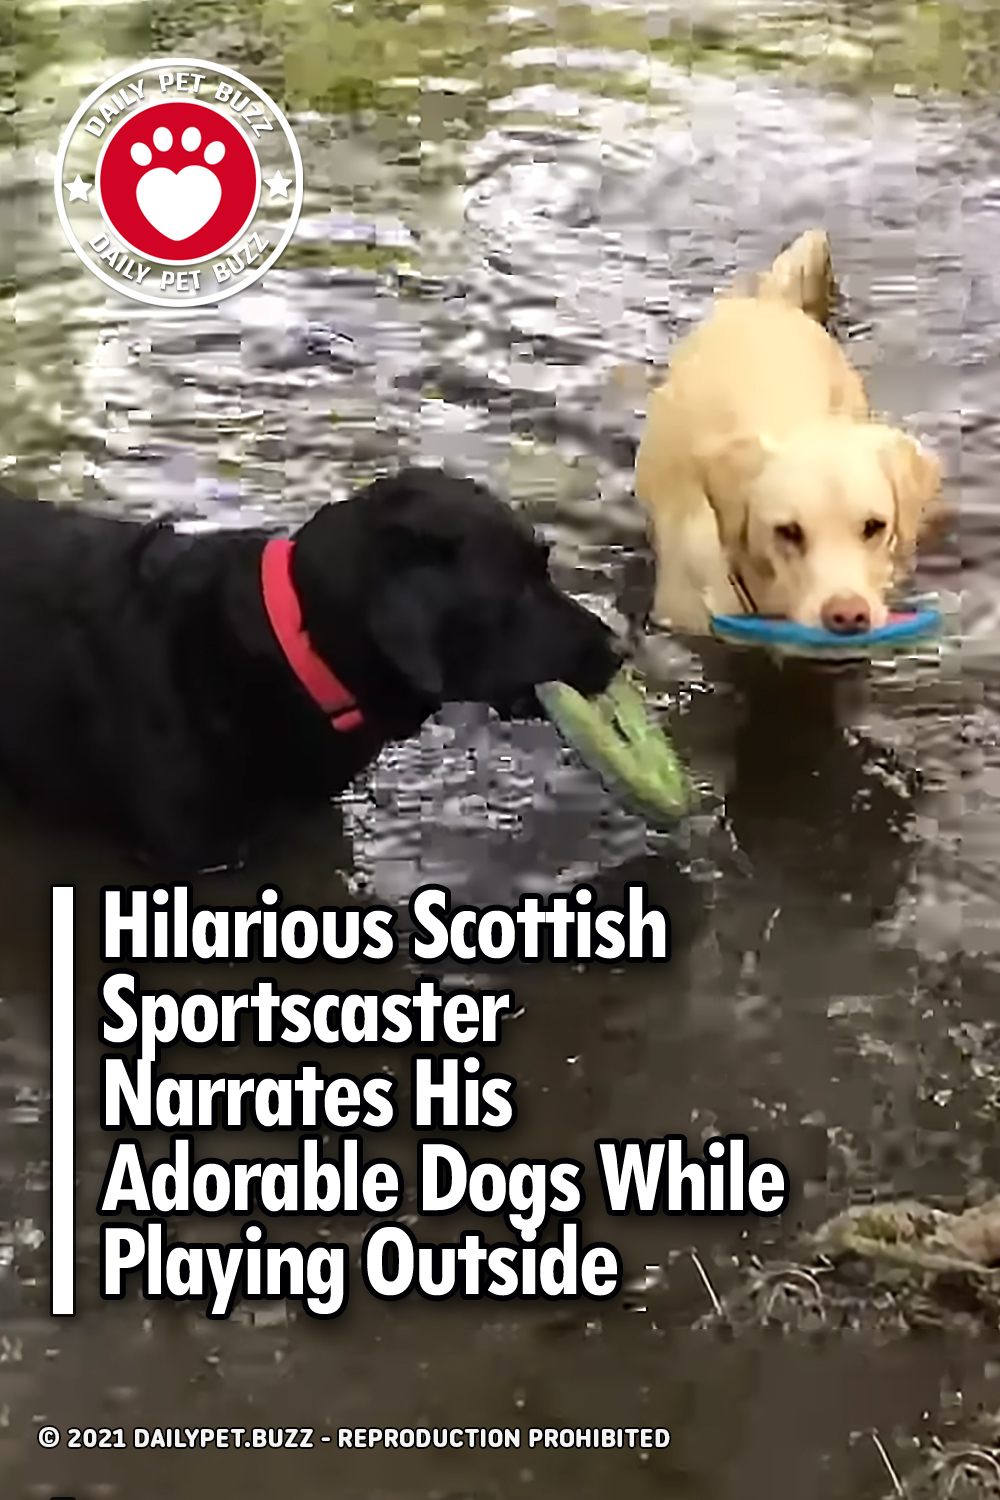 Hilarious Scottish Sportscaster Narrates His Adorable Dogs While Playing Outside